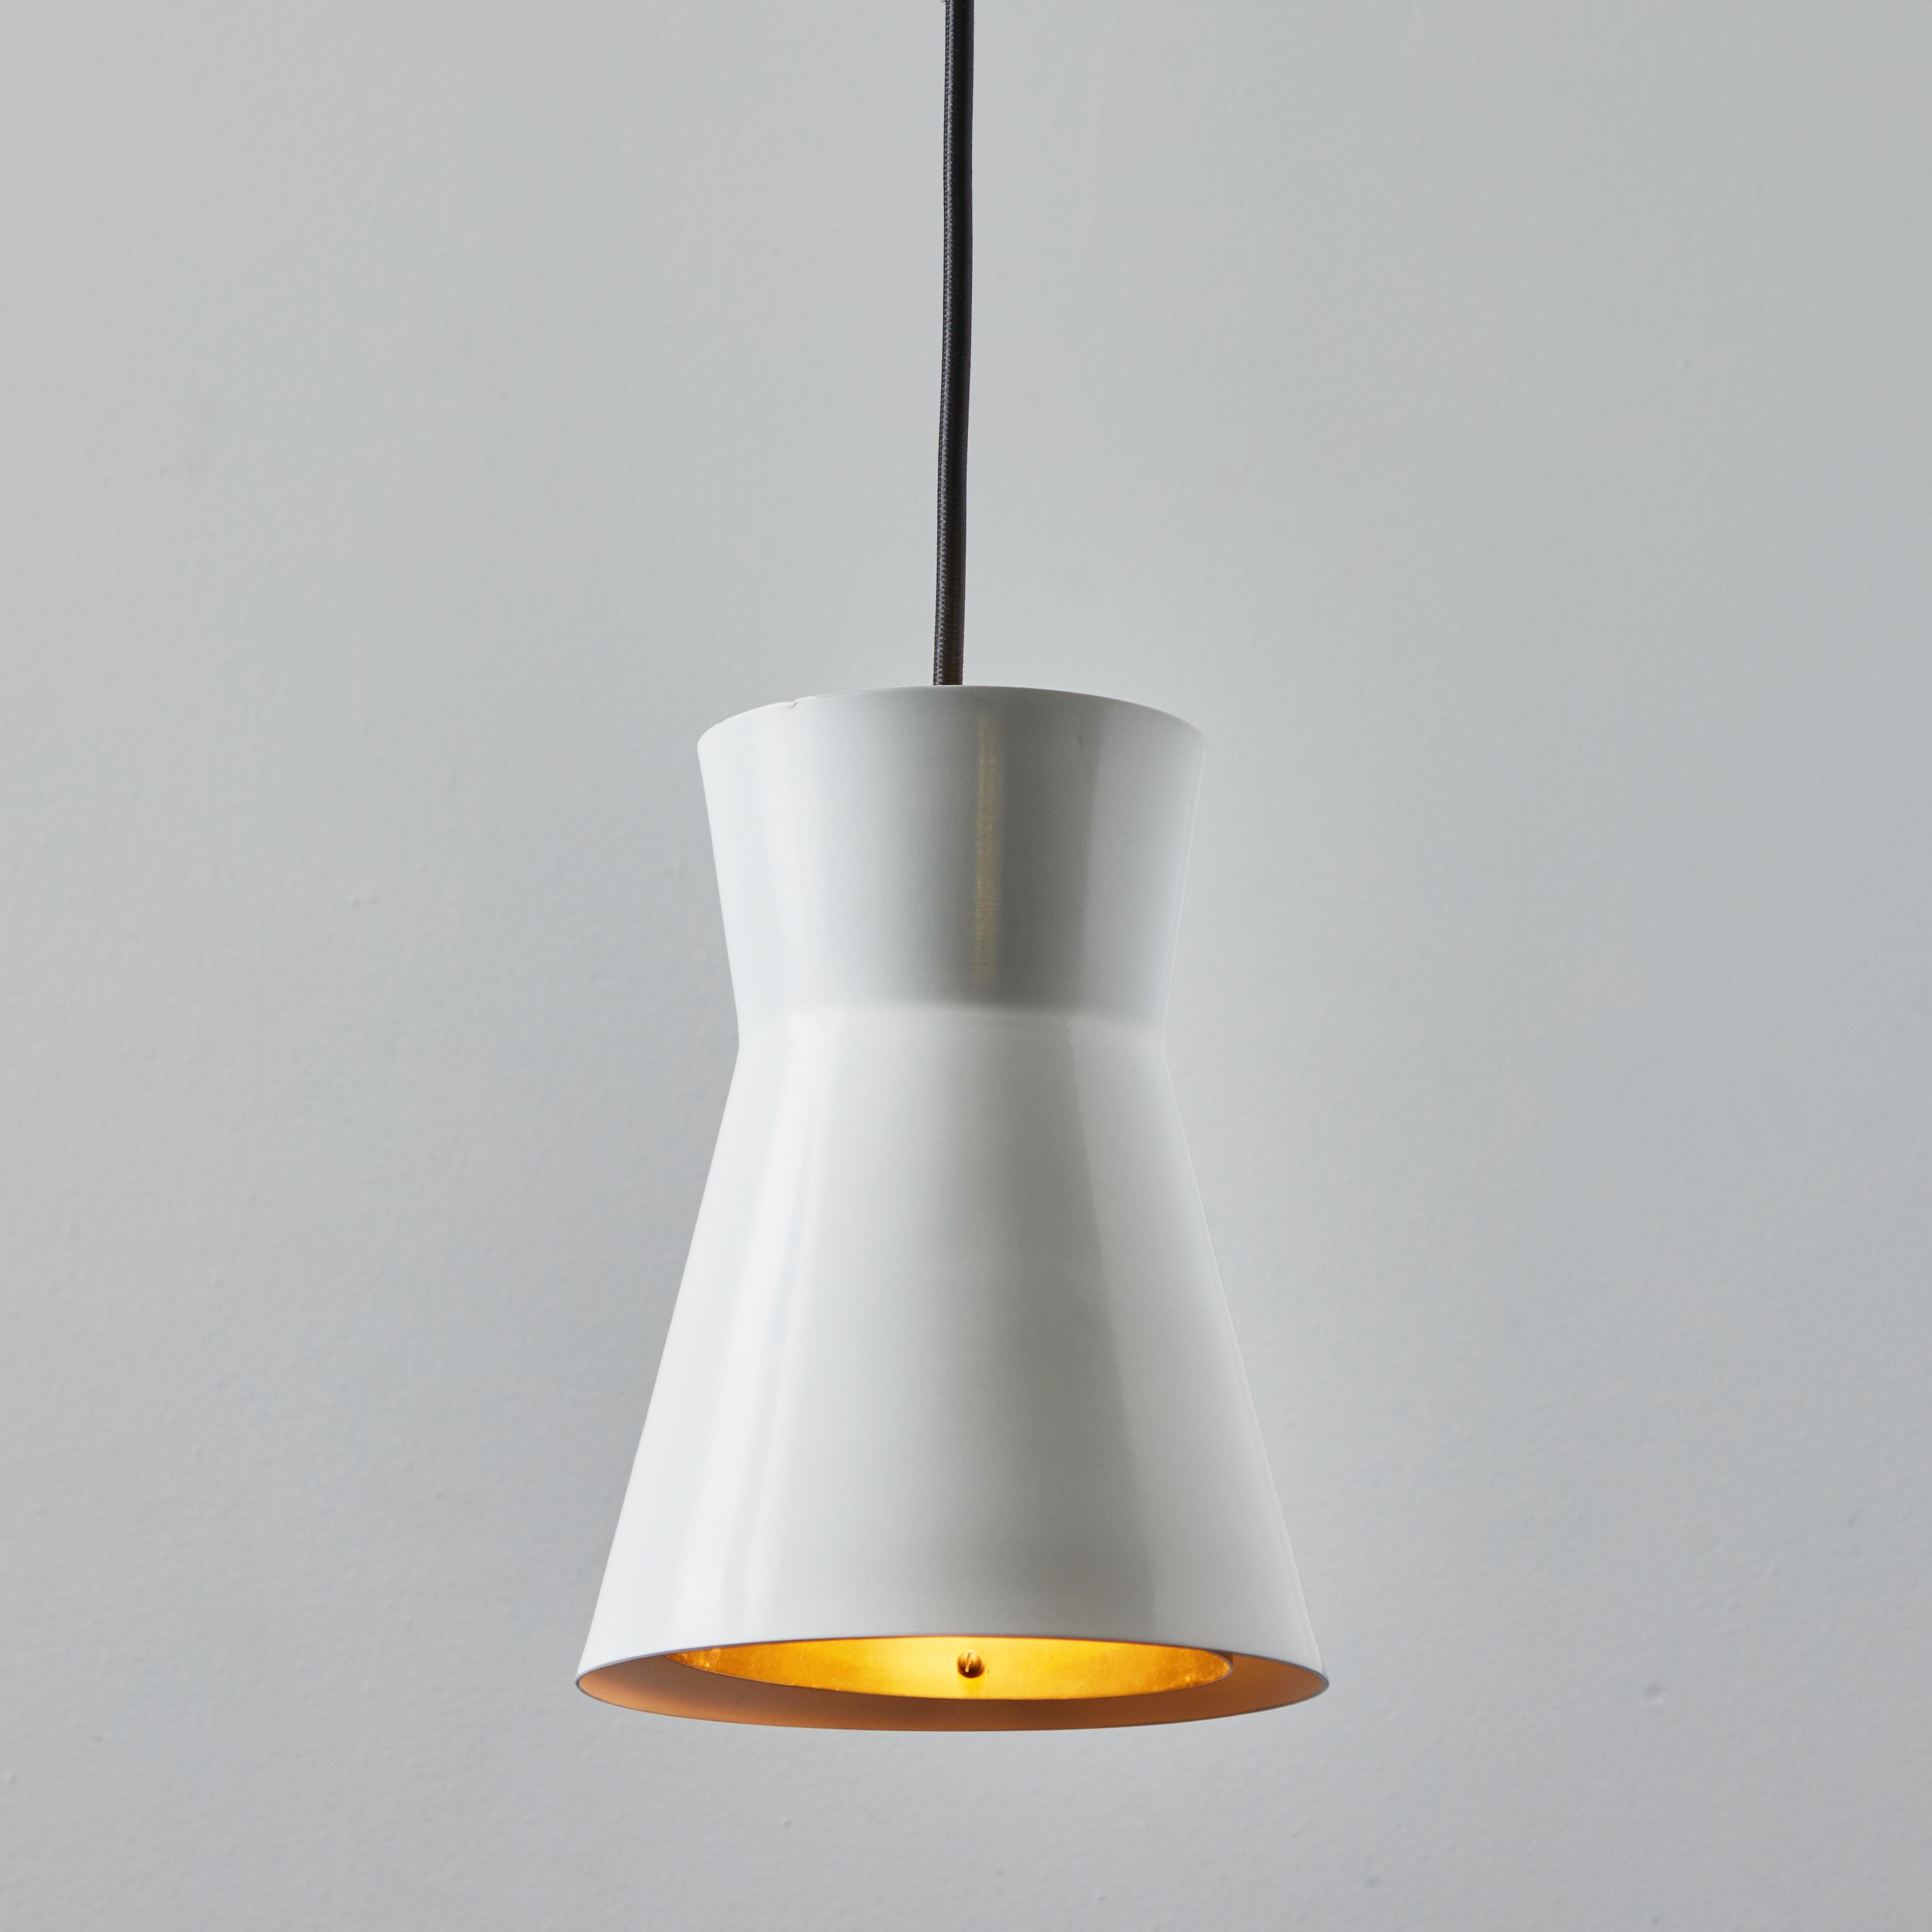 1960s Lisa Johansson Pape Model #61-362 Brass & Metal Pendant for Stockmann Orno. Executed in white painted metal and polished brass. An incredibly refined piece that is quintessentially Finnish in its conception and execution.

A contemporary of